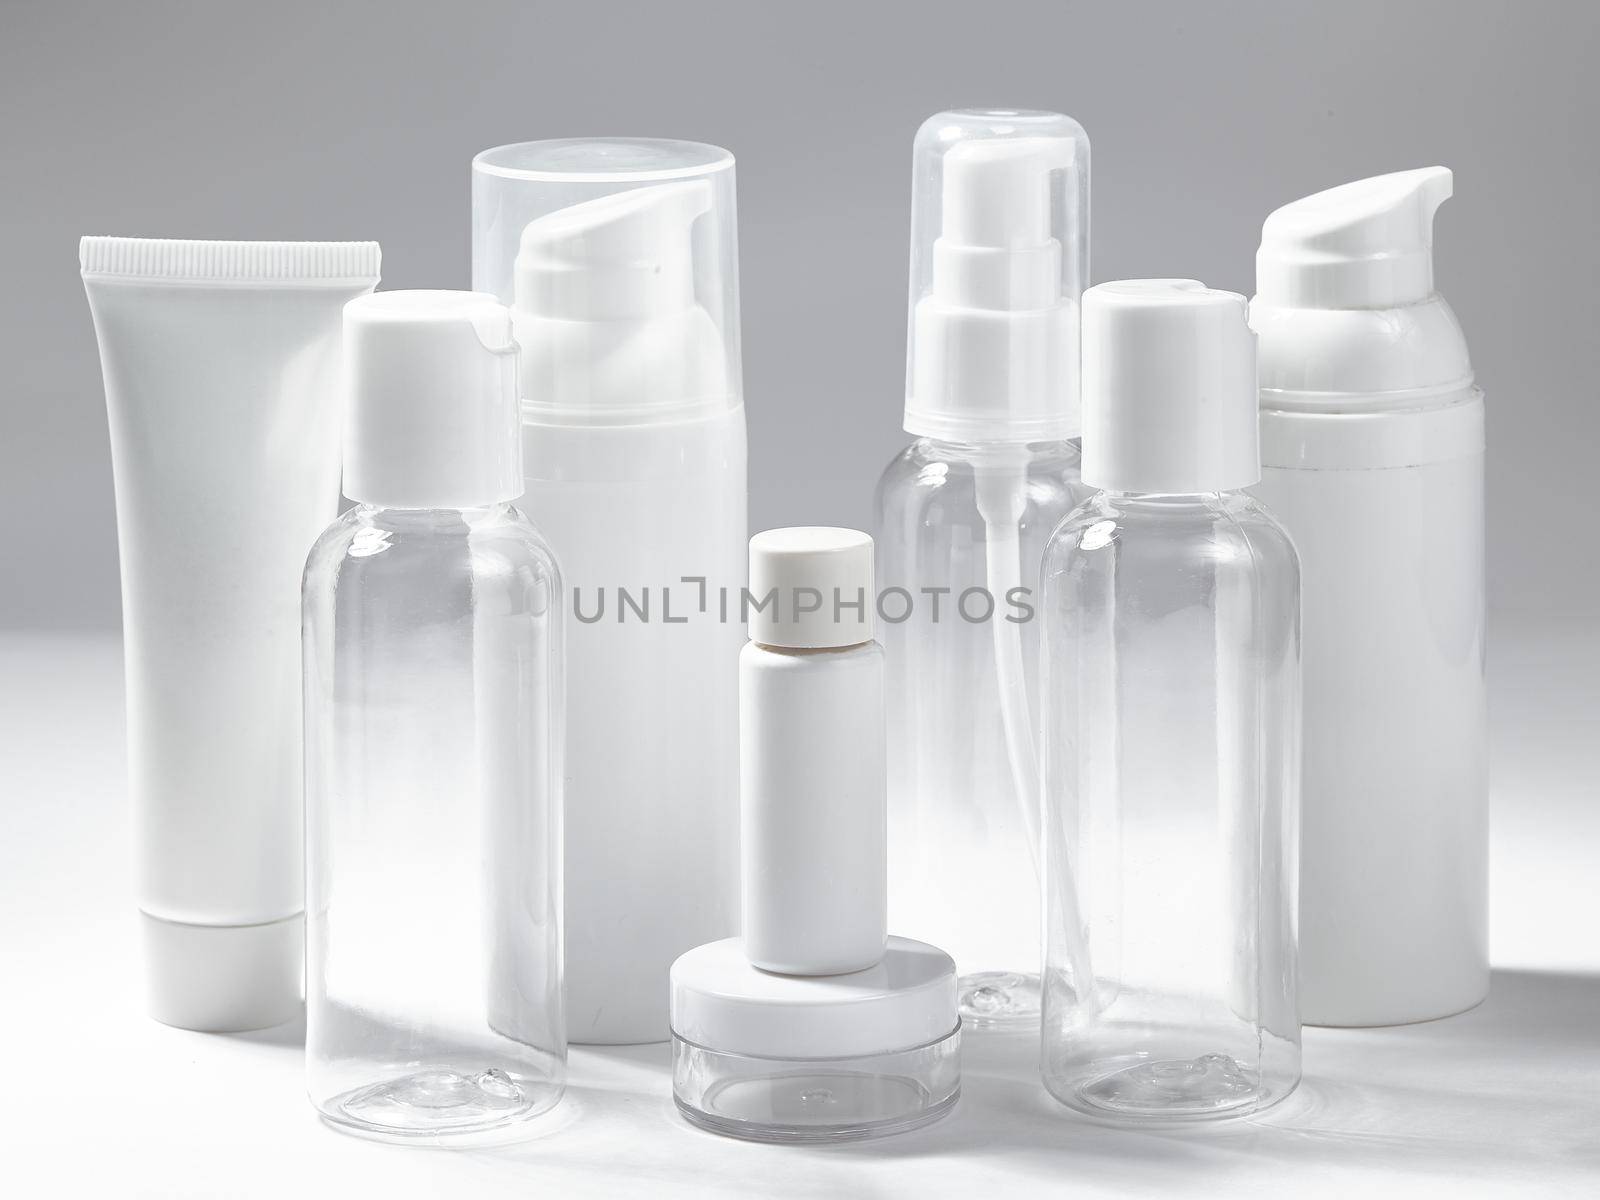 White cosmetic bottles on white background. Wellness, spa and body care bottles collection. Beauty treatment, bathroom set